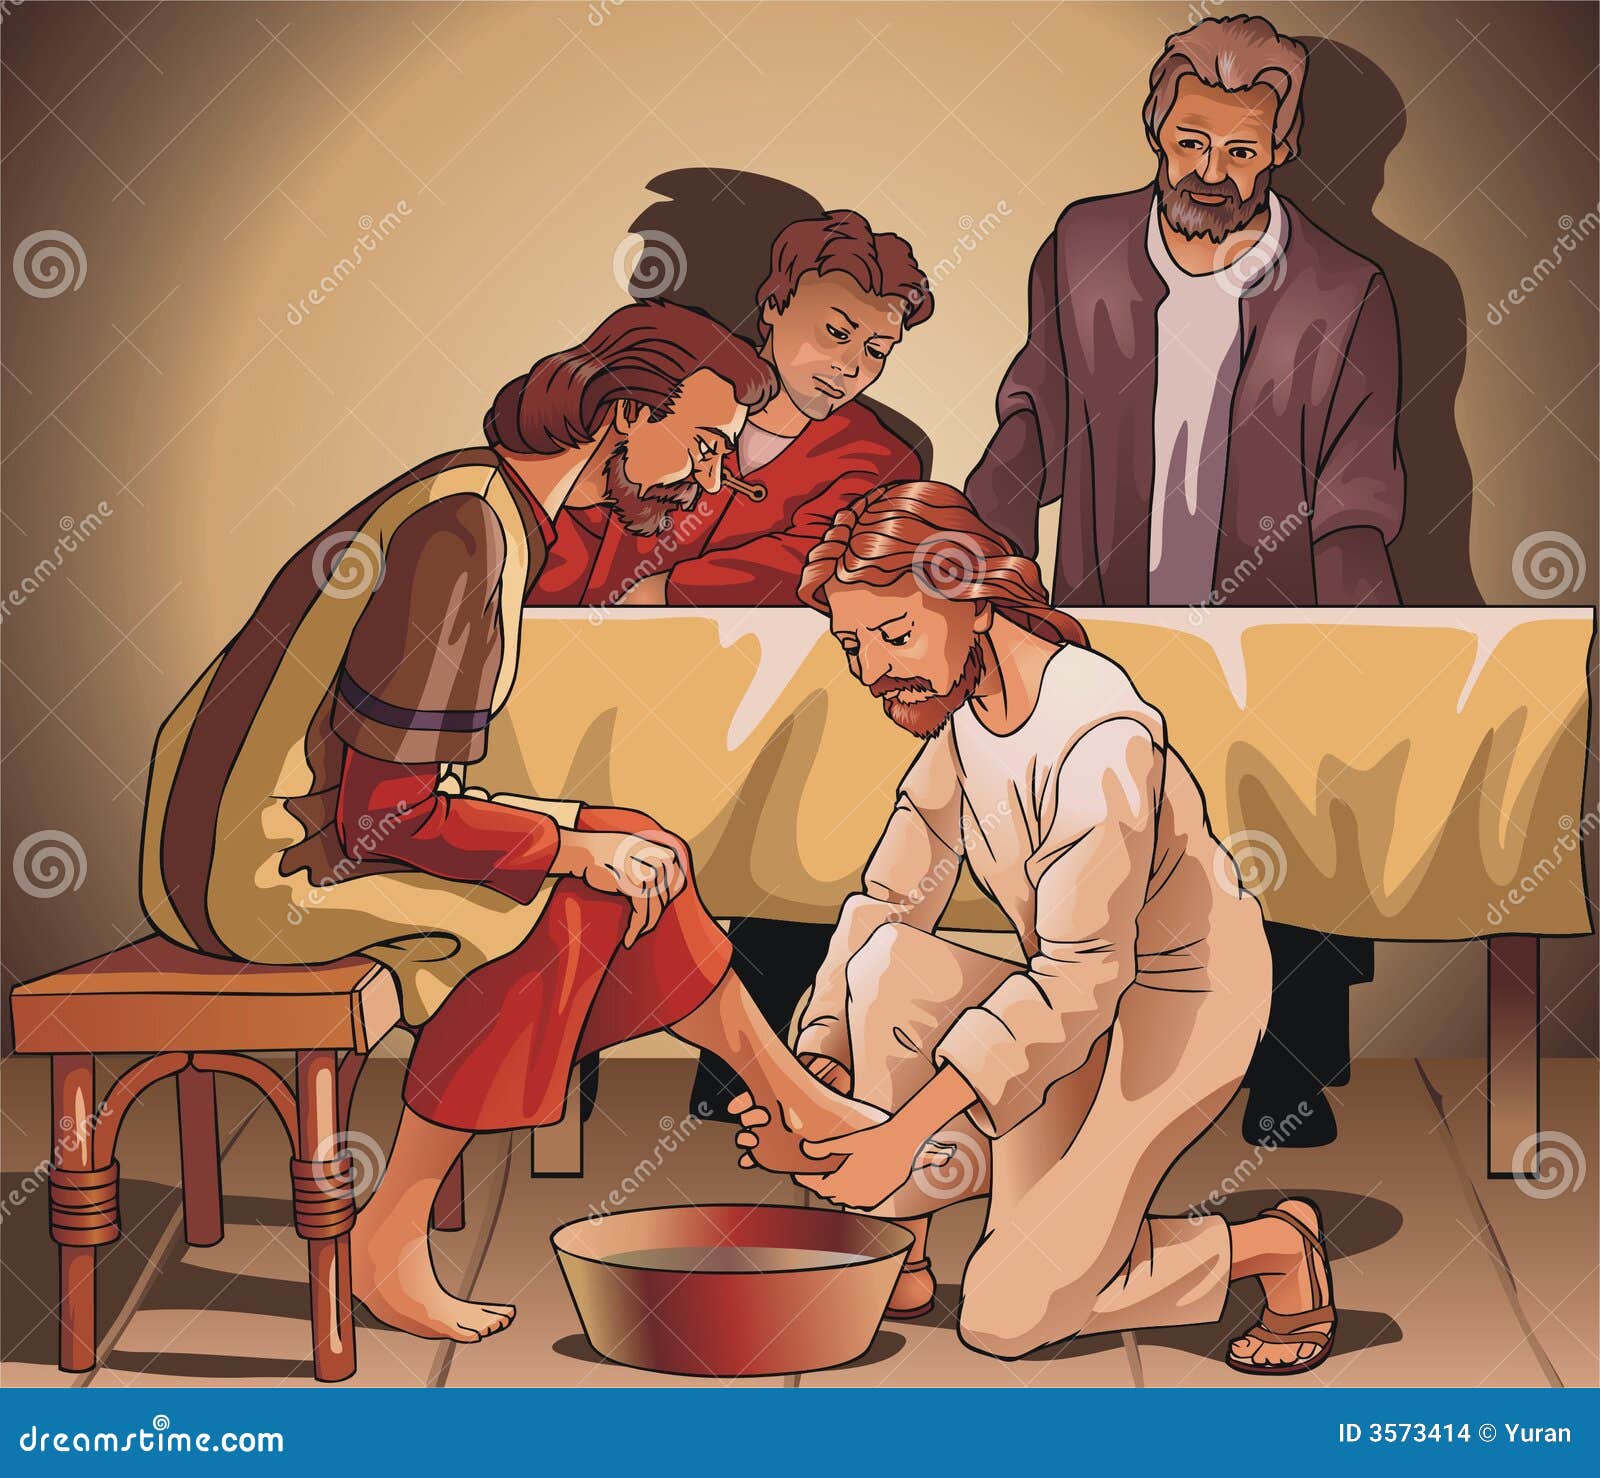 clipart of jesus washing the disciples feet - photo #7